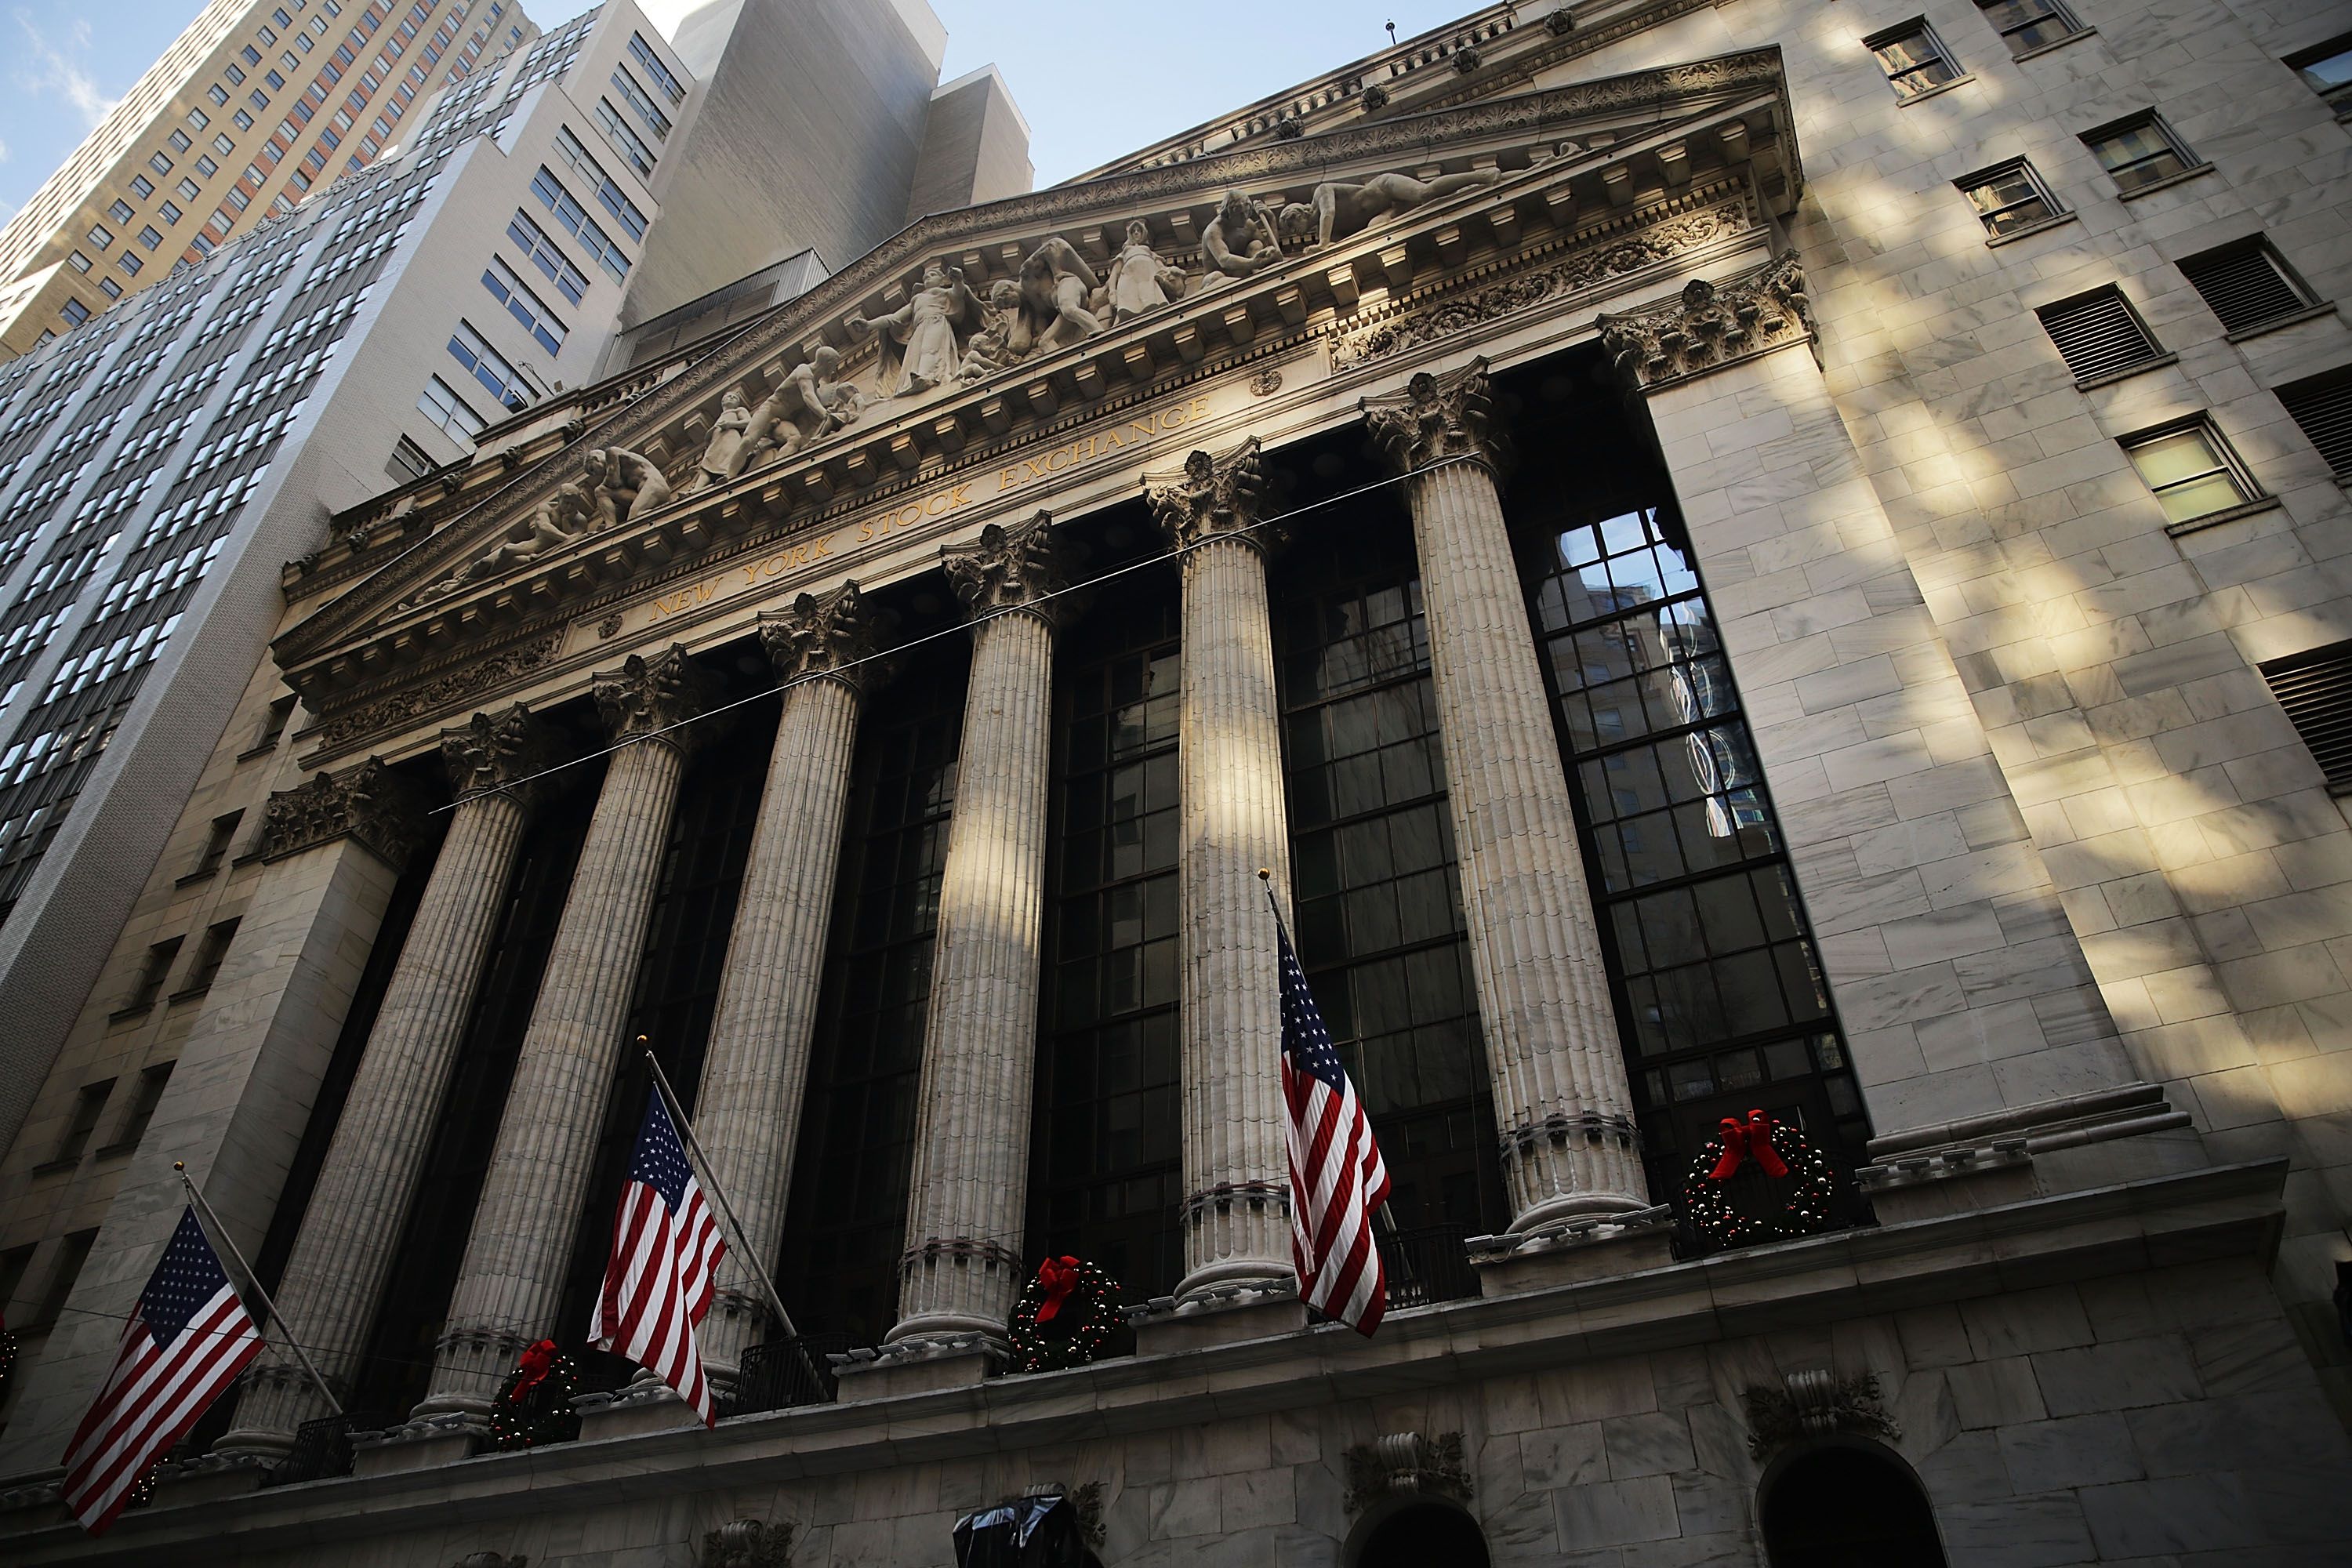 NEW YORK, NY - DECEMBER 03: The New York Stock Exchange (NYSE) is viewed on December 3, 2015 in New York City. The Dow Jones industrial average is down over 120 points in afternoon trading on news that the European Central Bank's new stimulus plan is not as aggressive as some investors had hoped. Spencer Platt/Getty Images/AFP == FOR NEWSPAPERS, INTERNET, TELCOS & TELEVISION USE ONLY ==